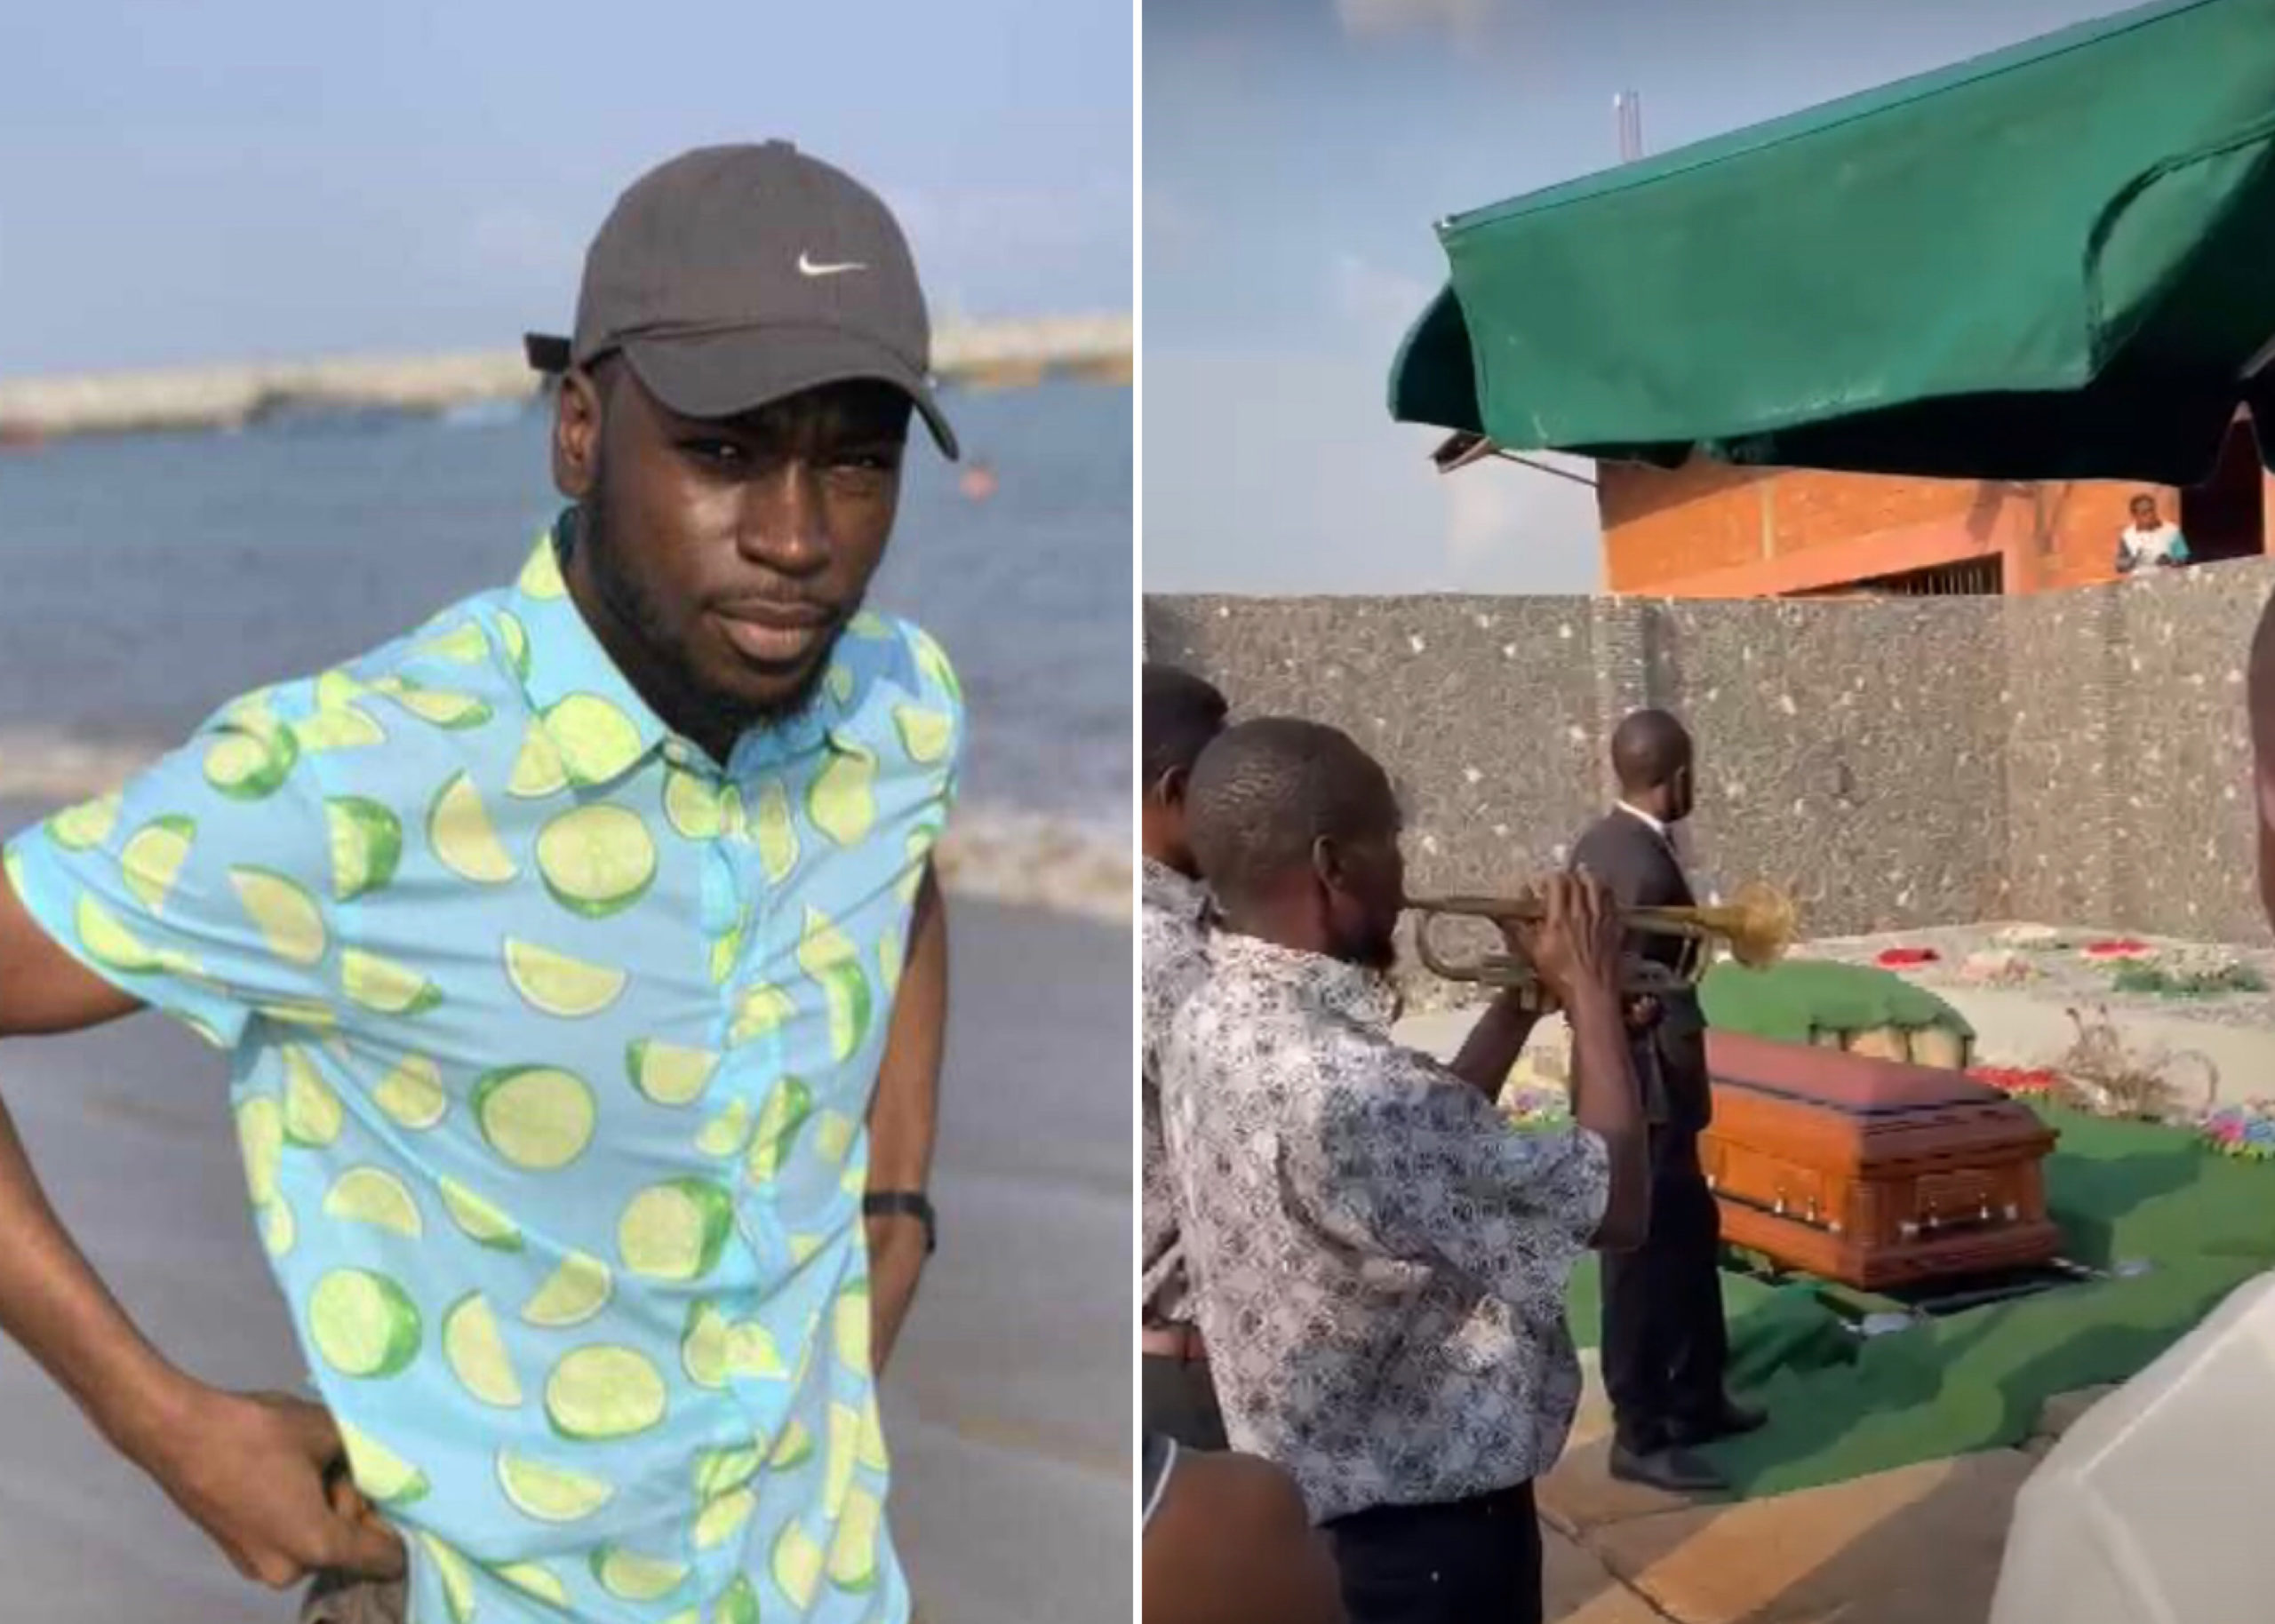 Oke Obi-Enadhuze, Young Man Who Got Killed Few Hours After Tweeting ‘Nigeria Will Not End Me’ Laid To Rest